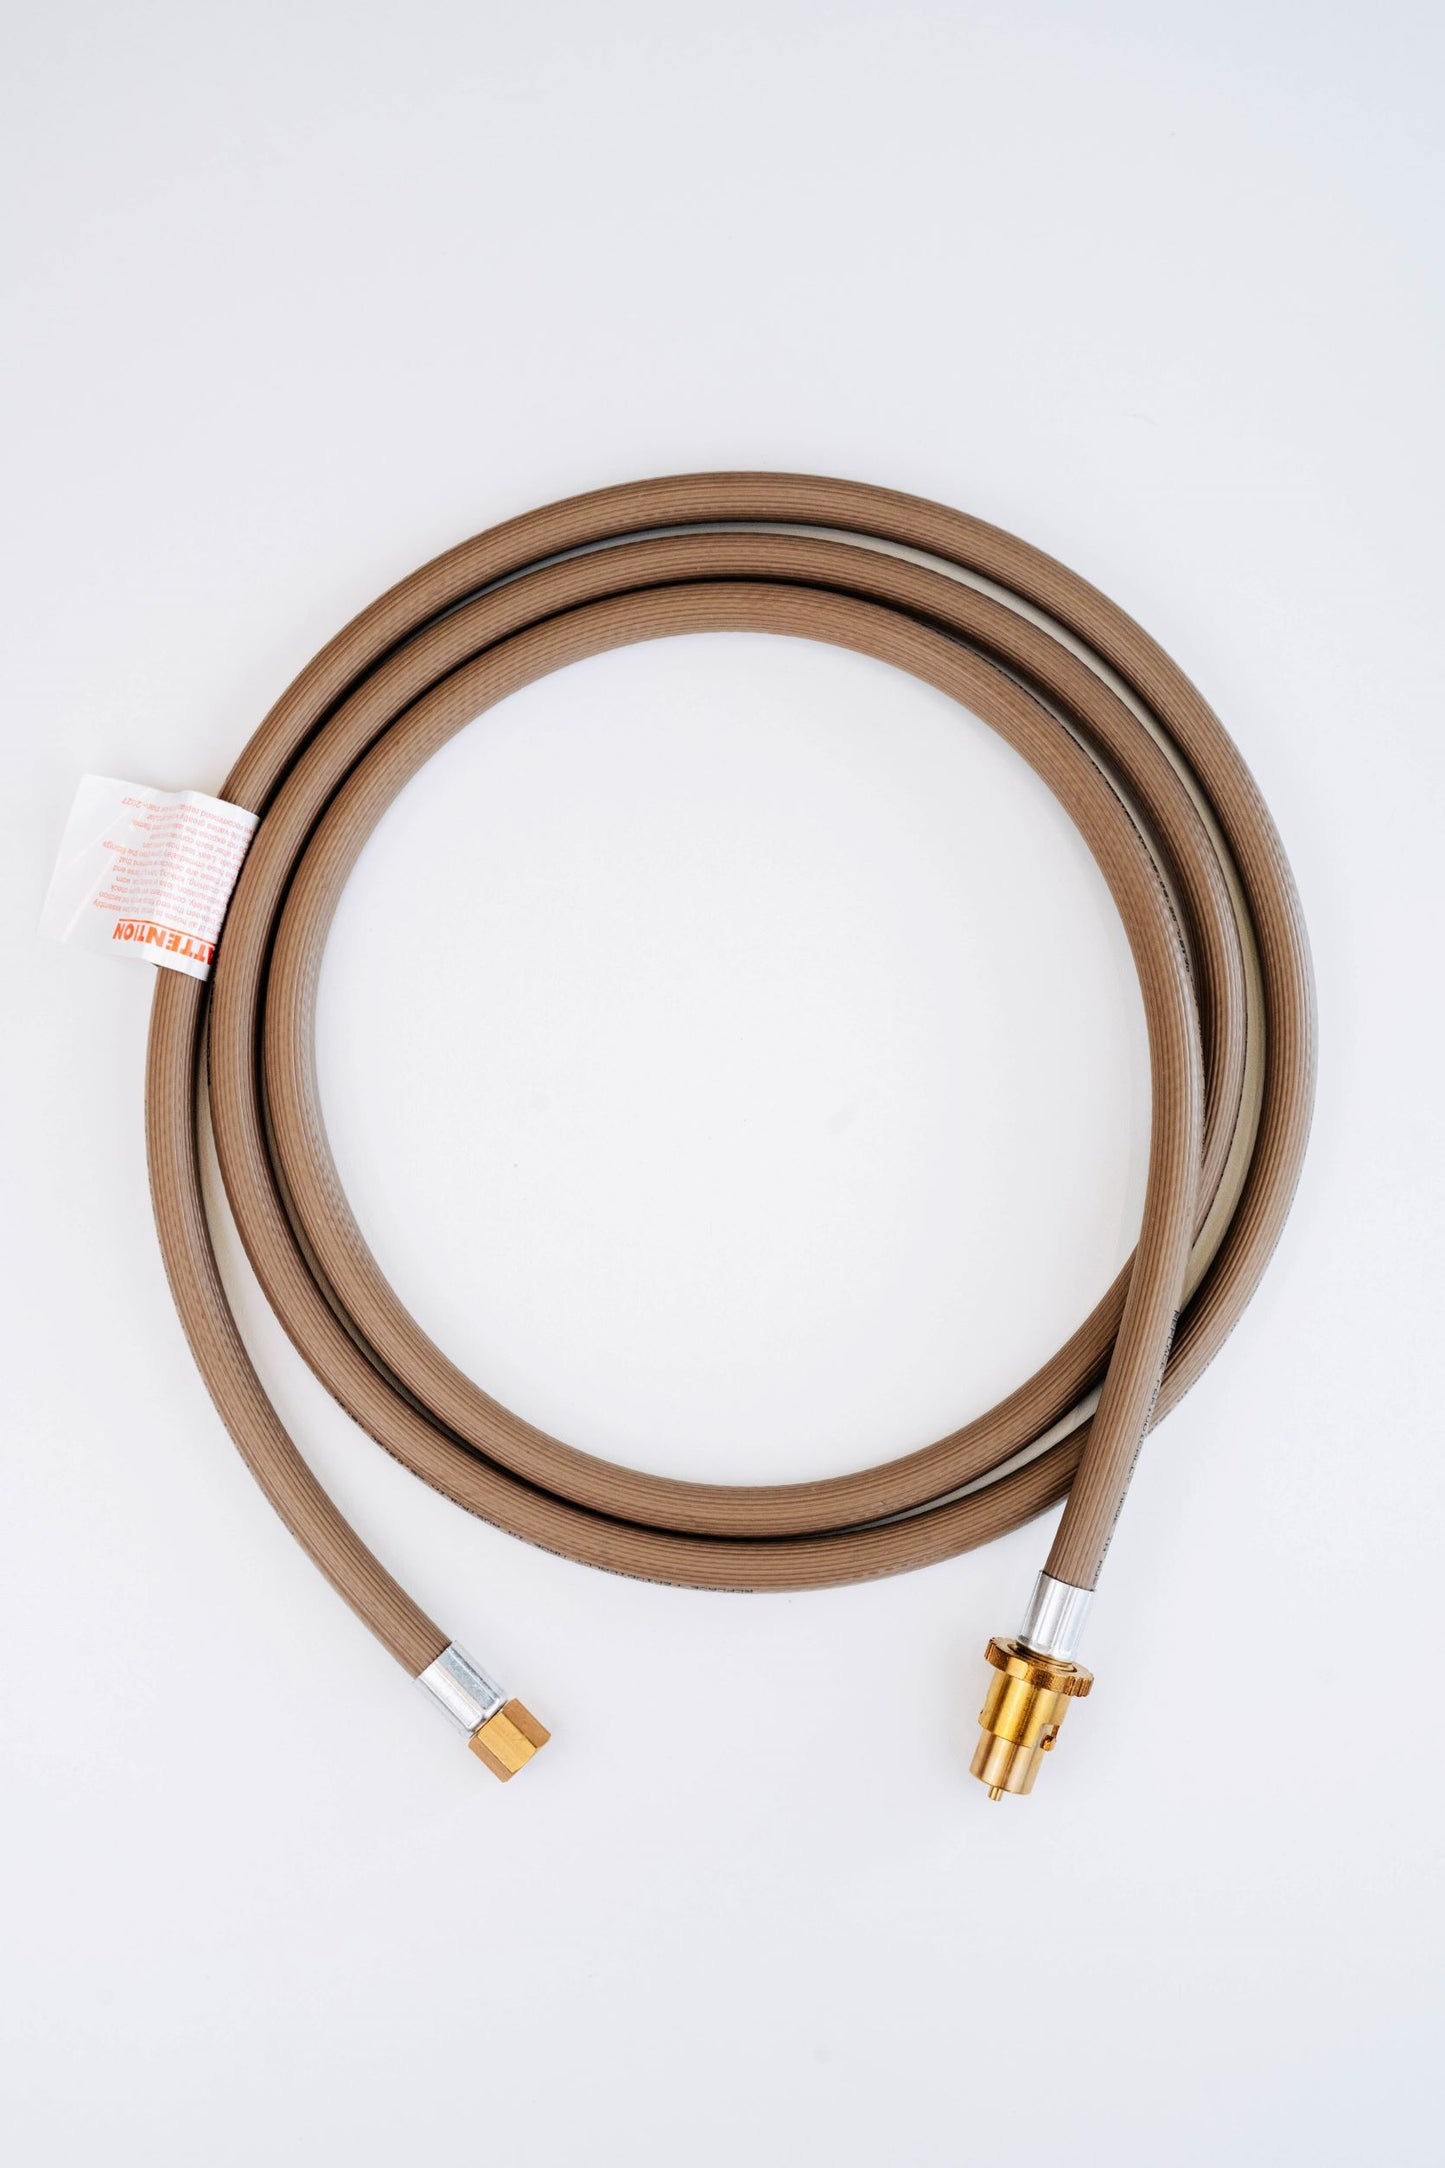 Gas hose for portable gas heaters